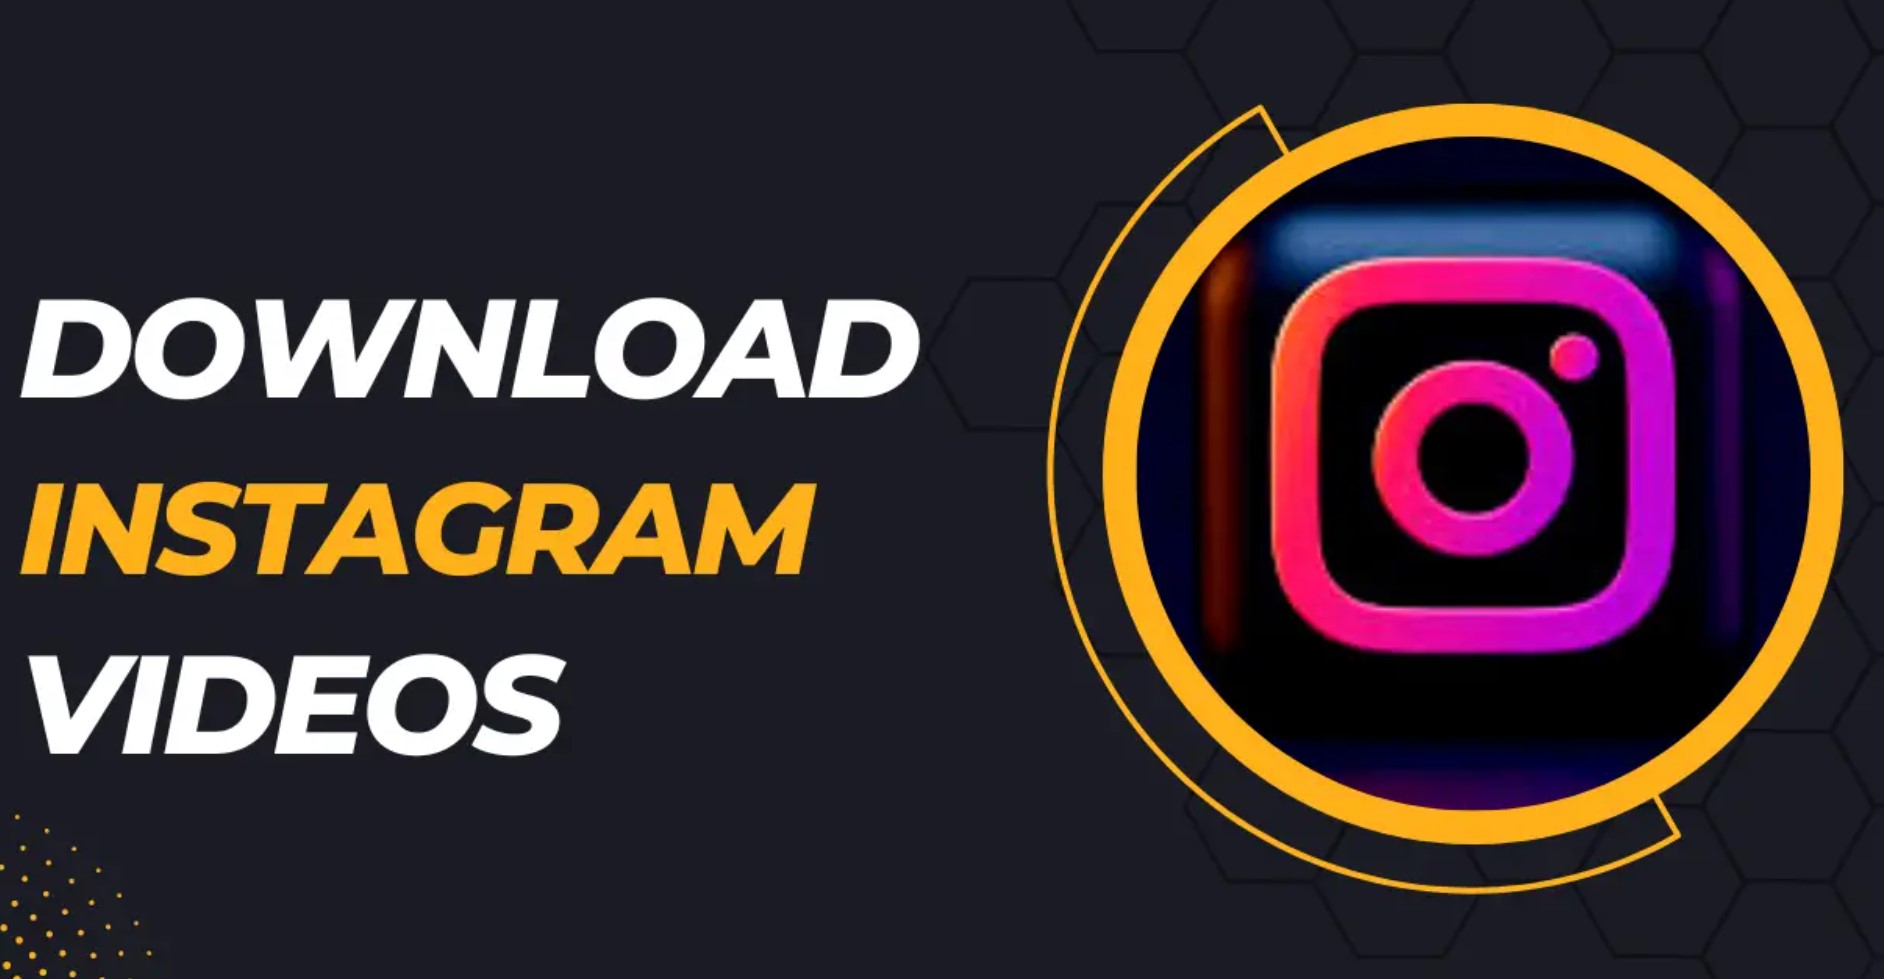 All the best ways to download Instagram videos today